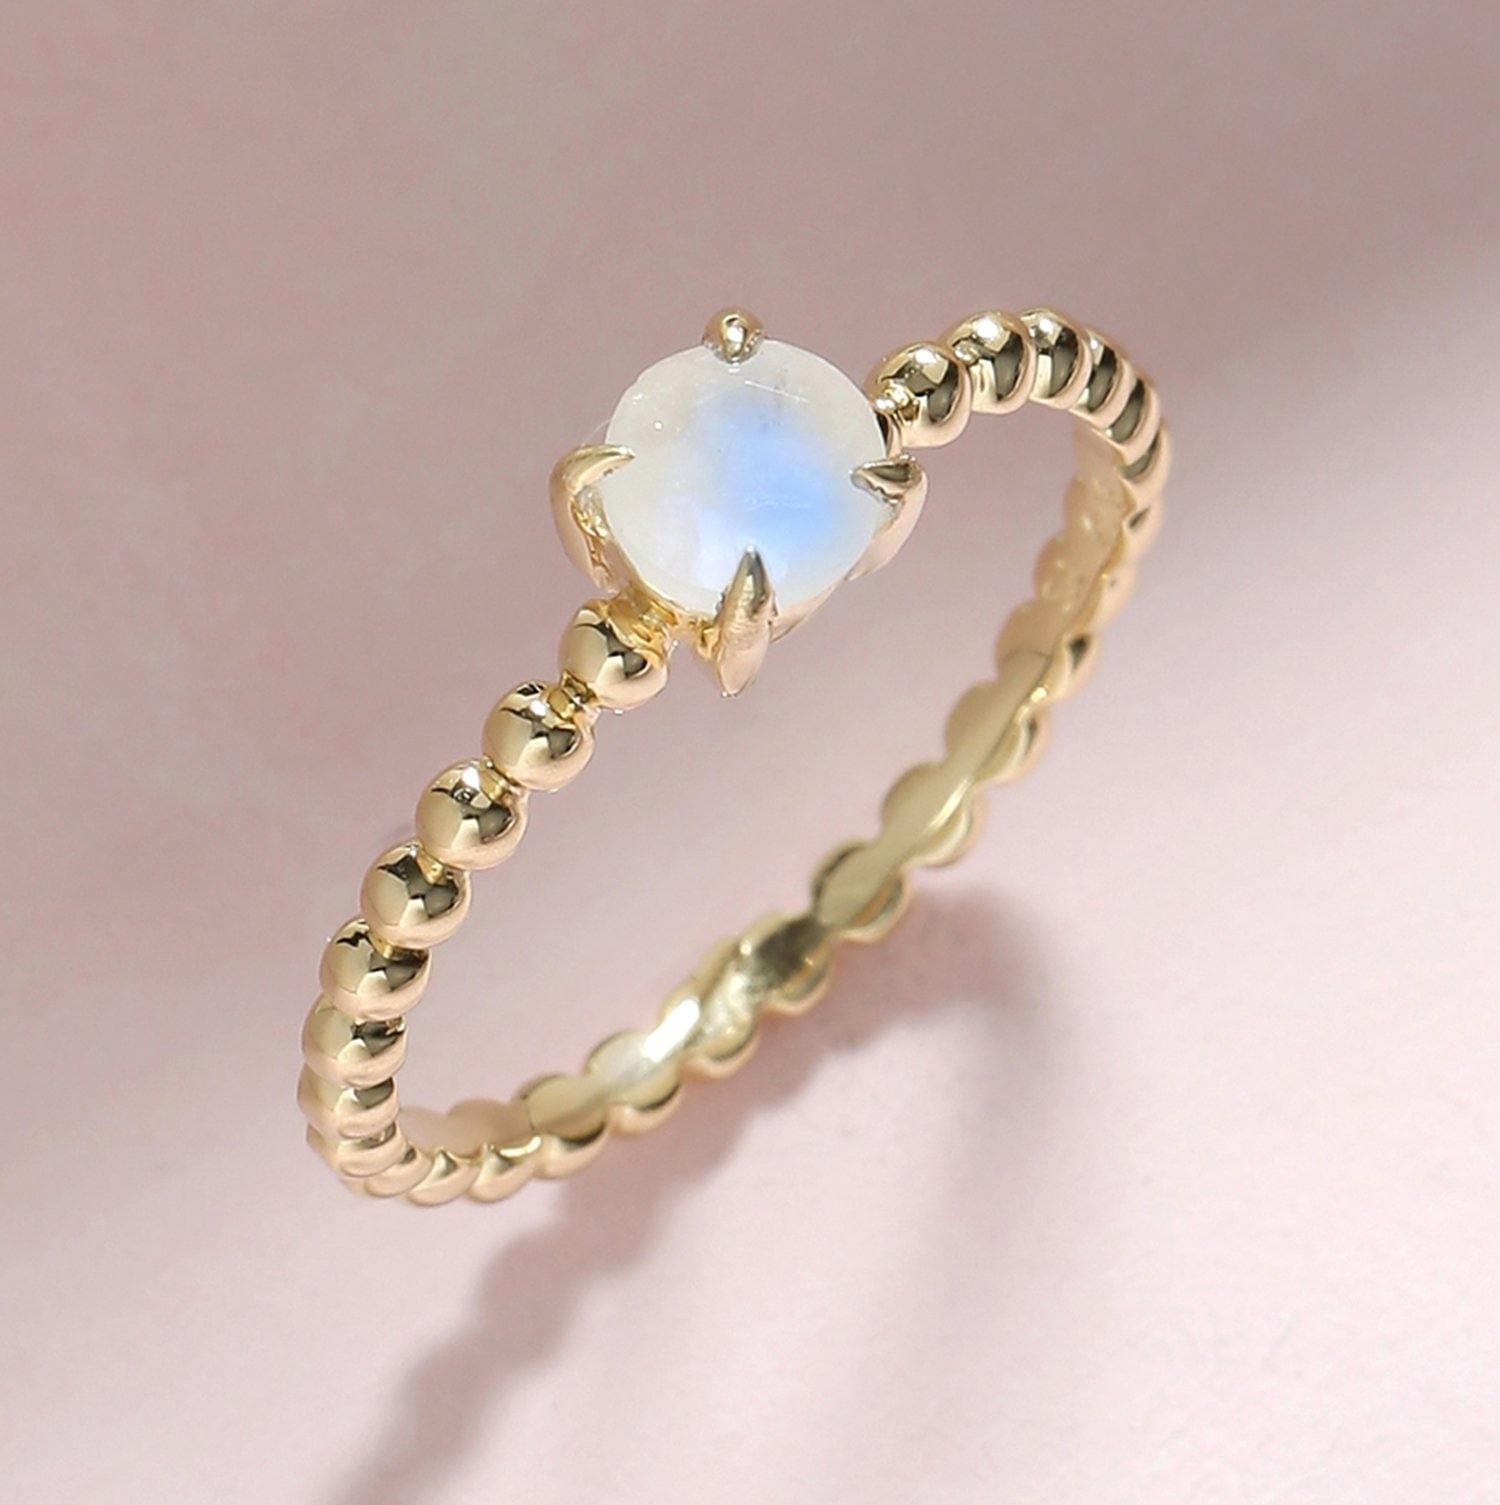 0.60 Ct Moonstone Solid 10k Yellow Gold Beaded Solitaire Ring Jewelry - YoTreasure